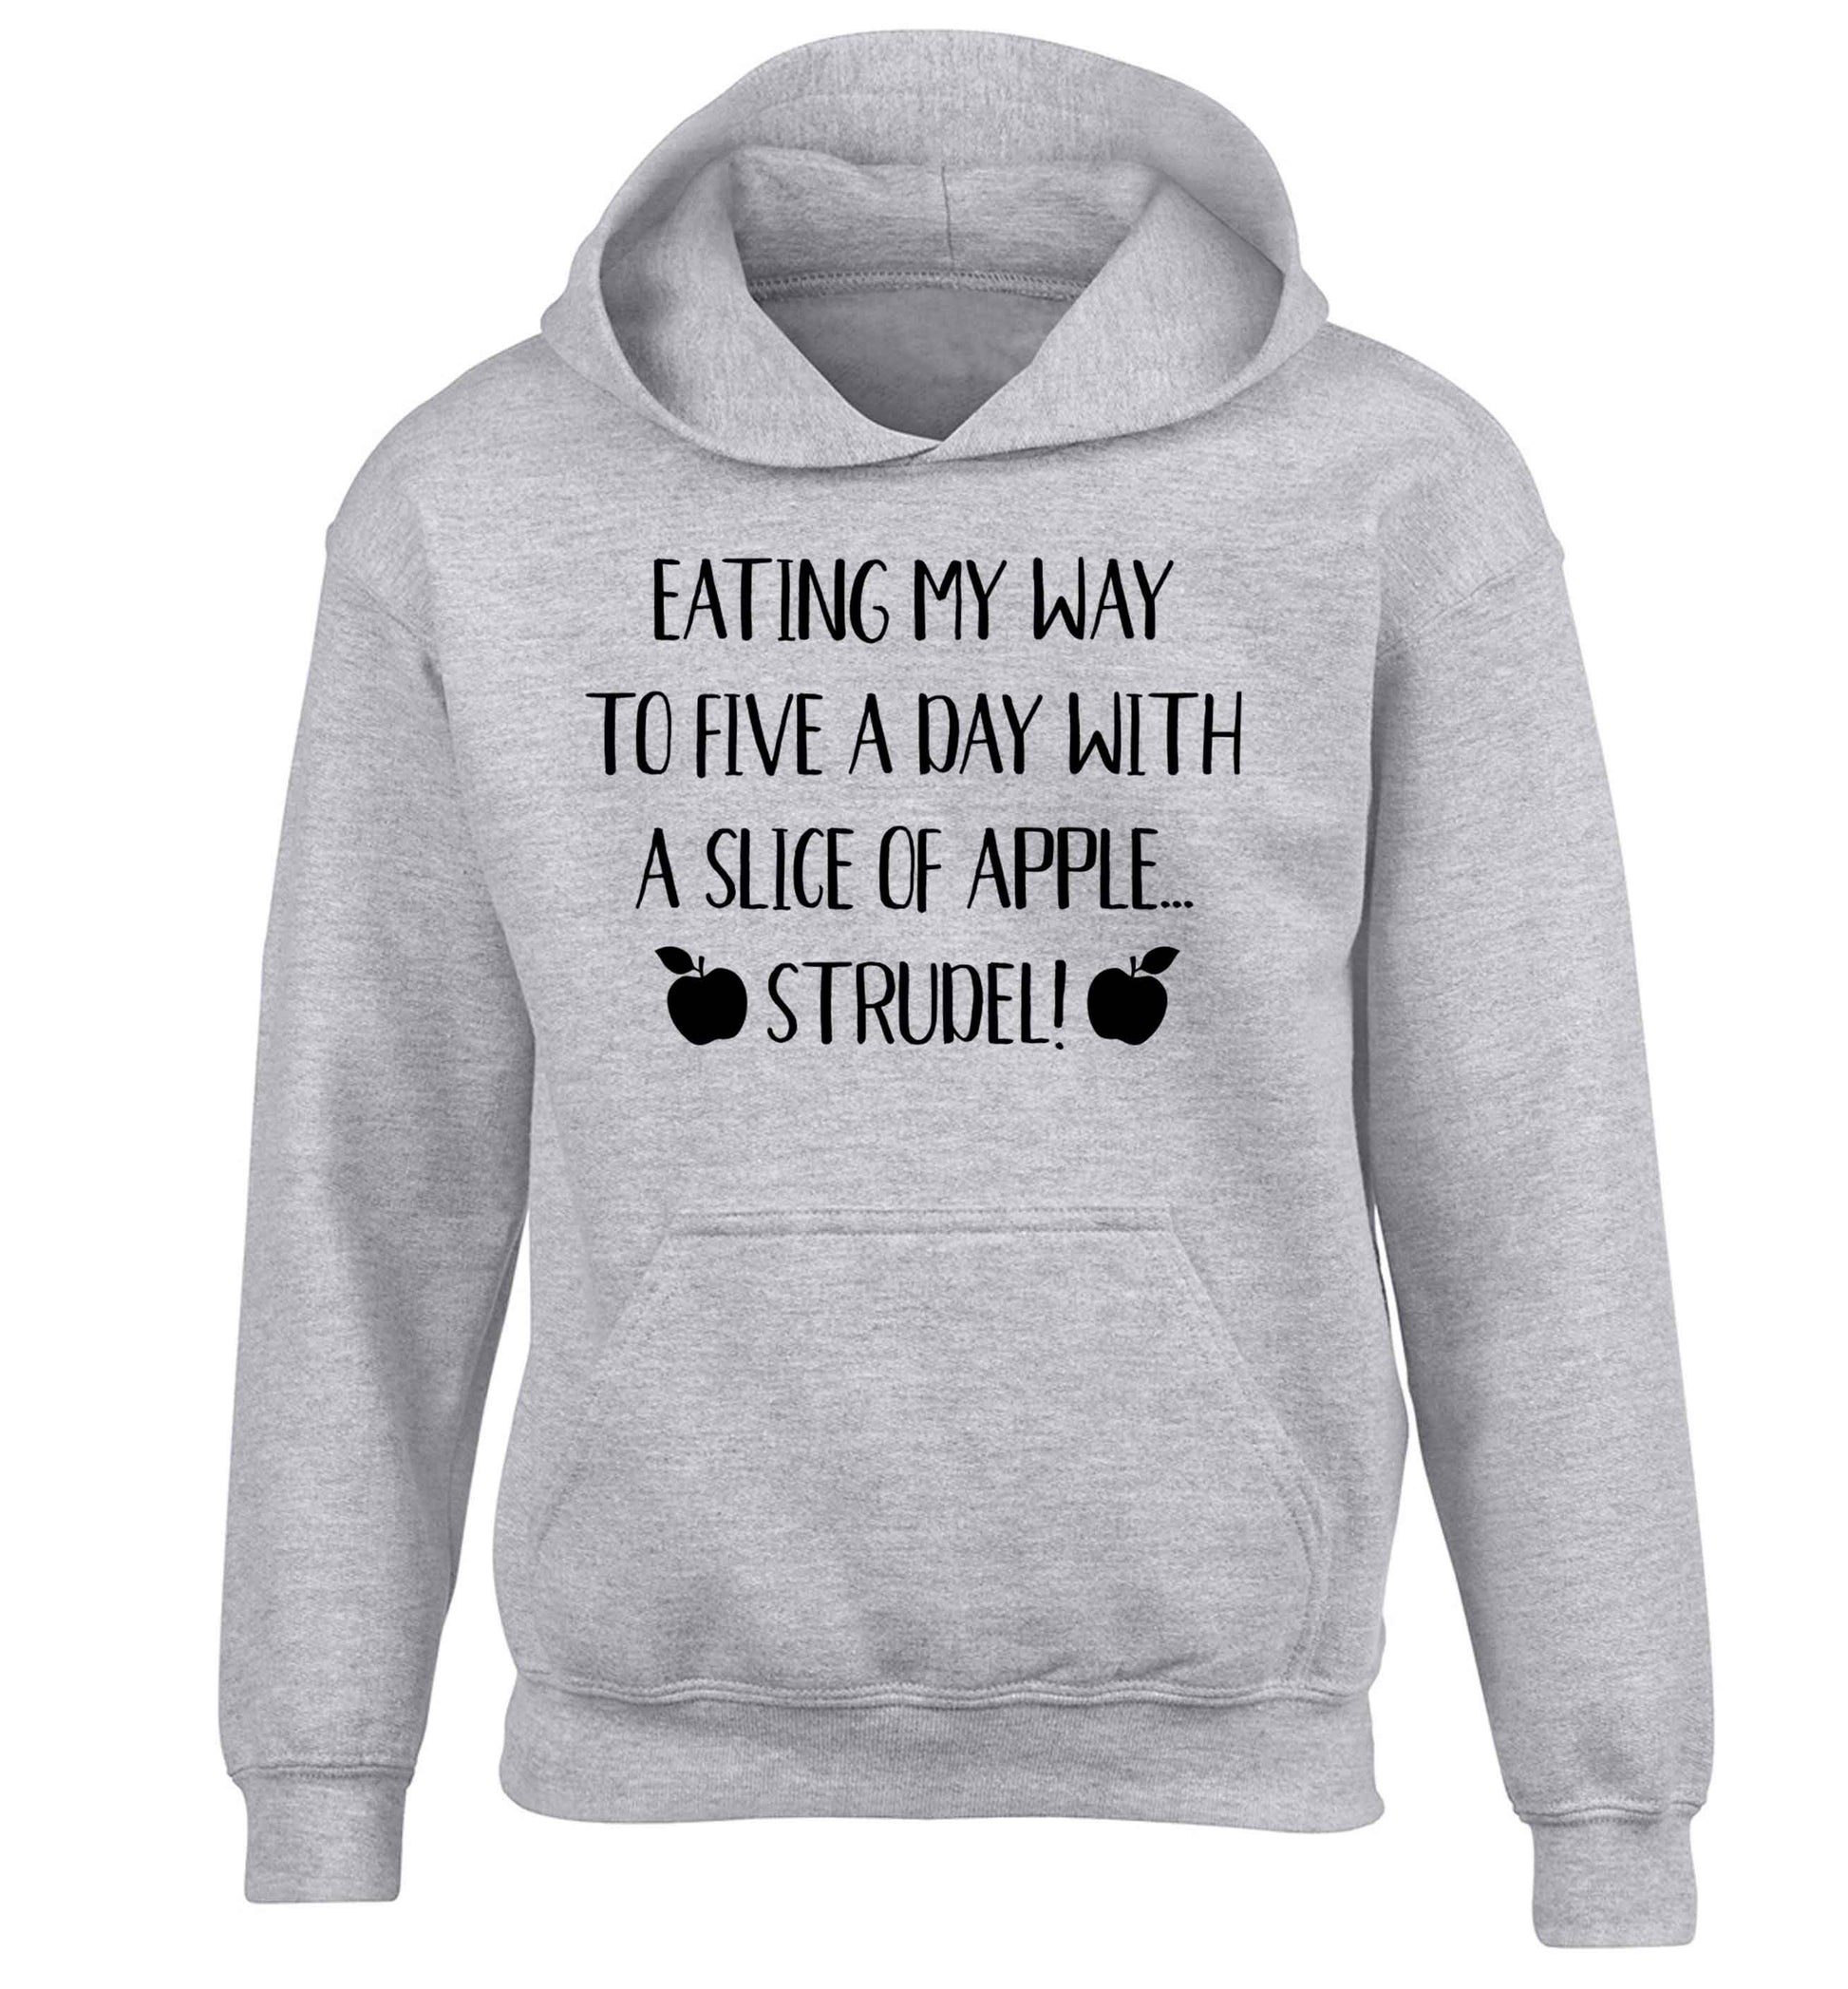 Eating my way to five a day with a slice of apple strudel children's grey hoodie 12-13 Years